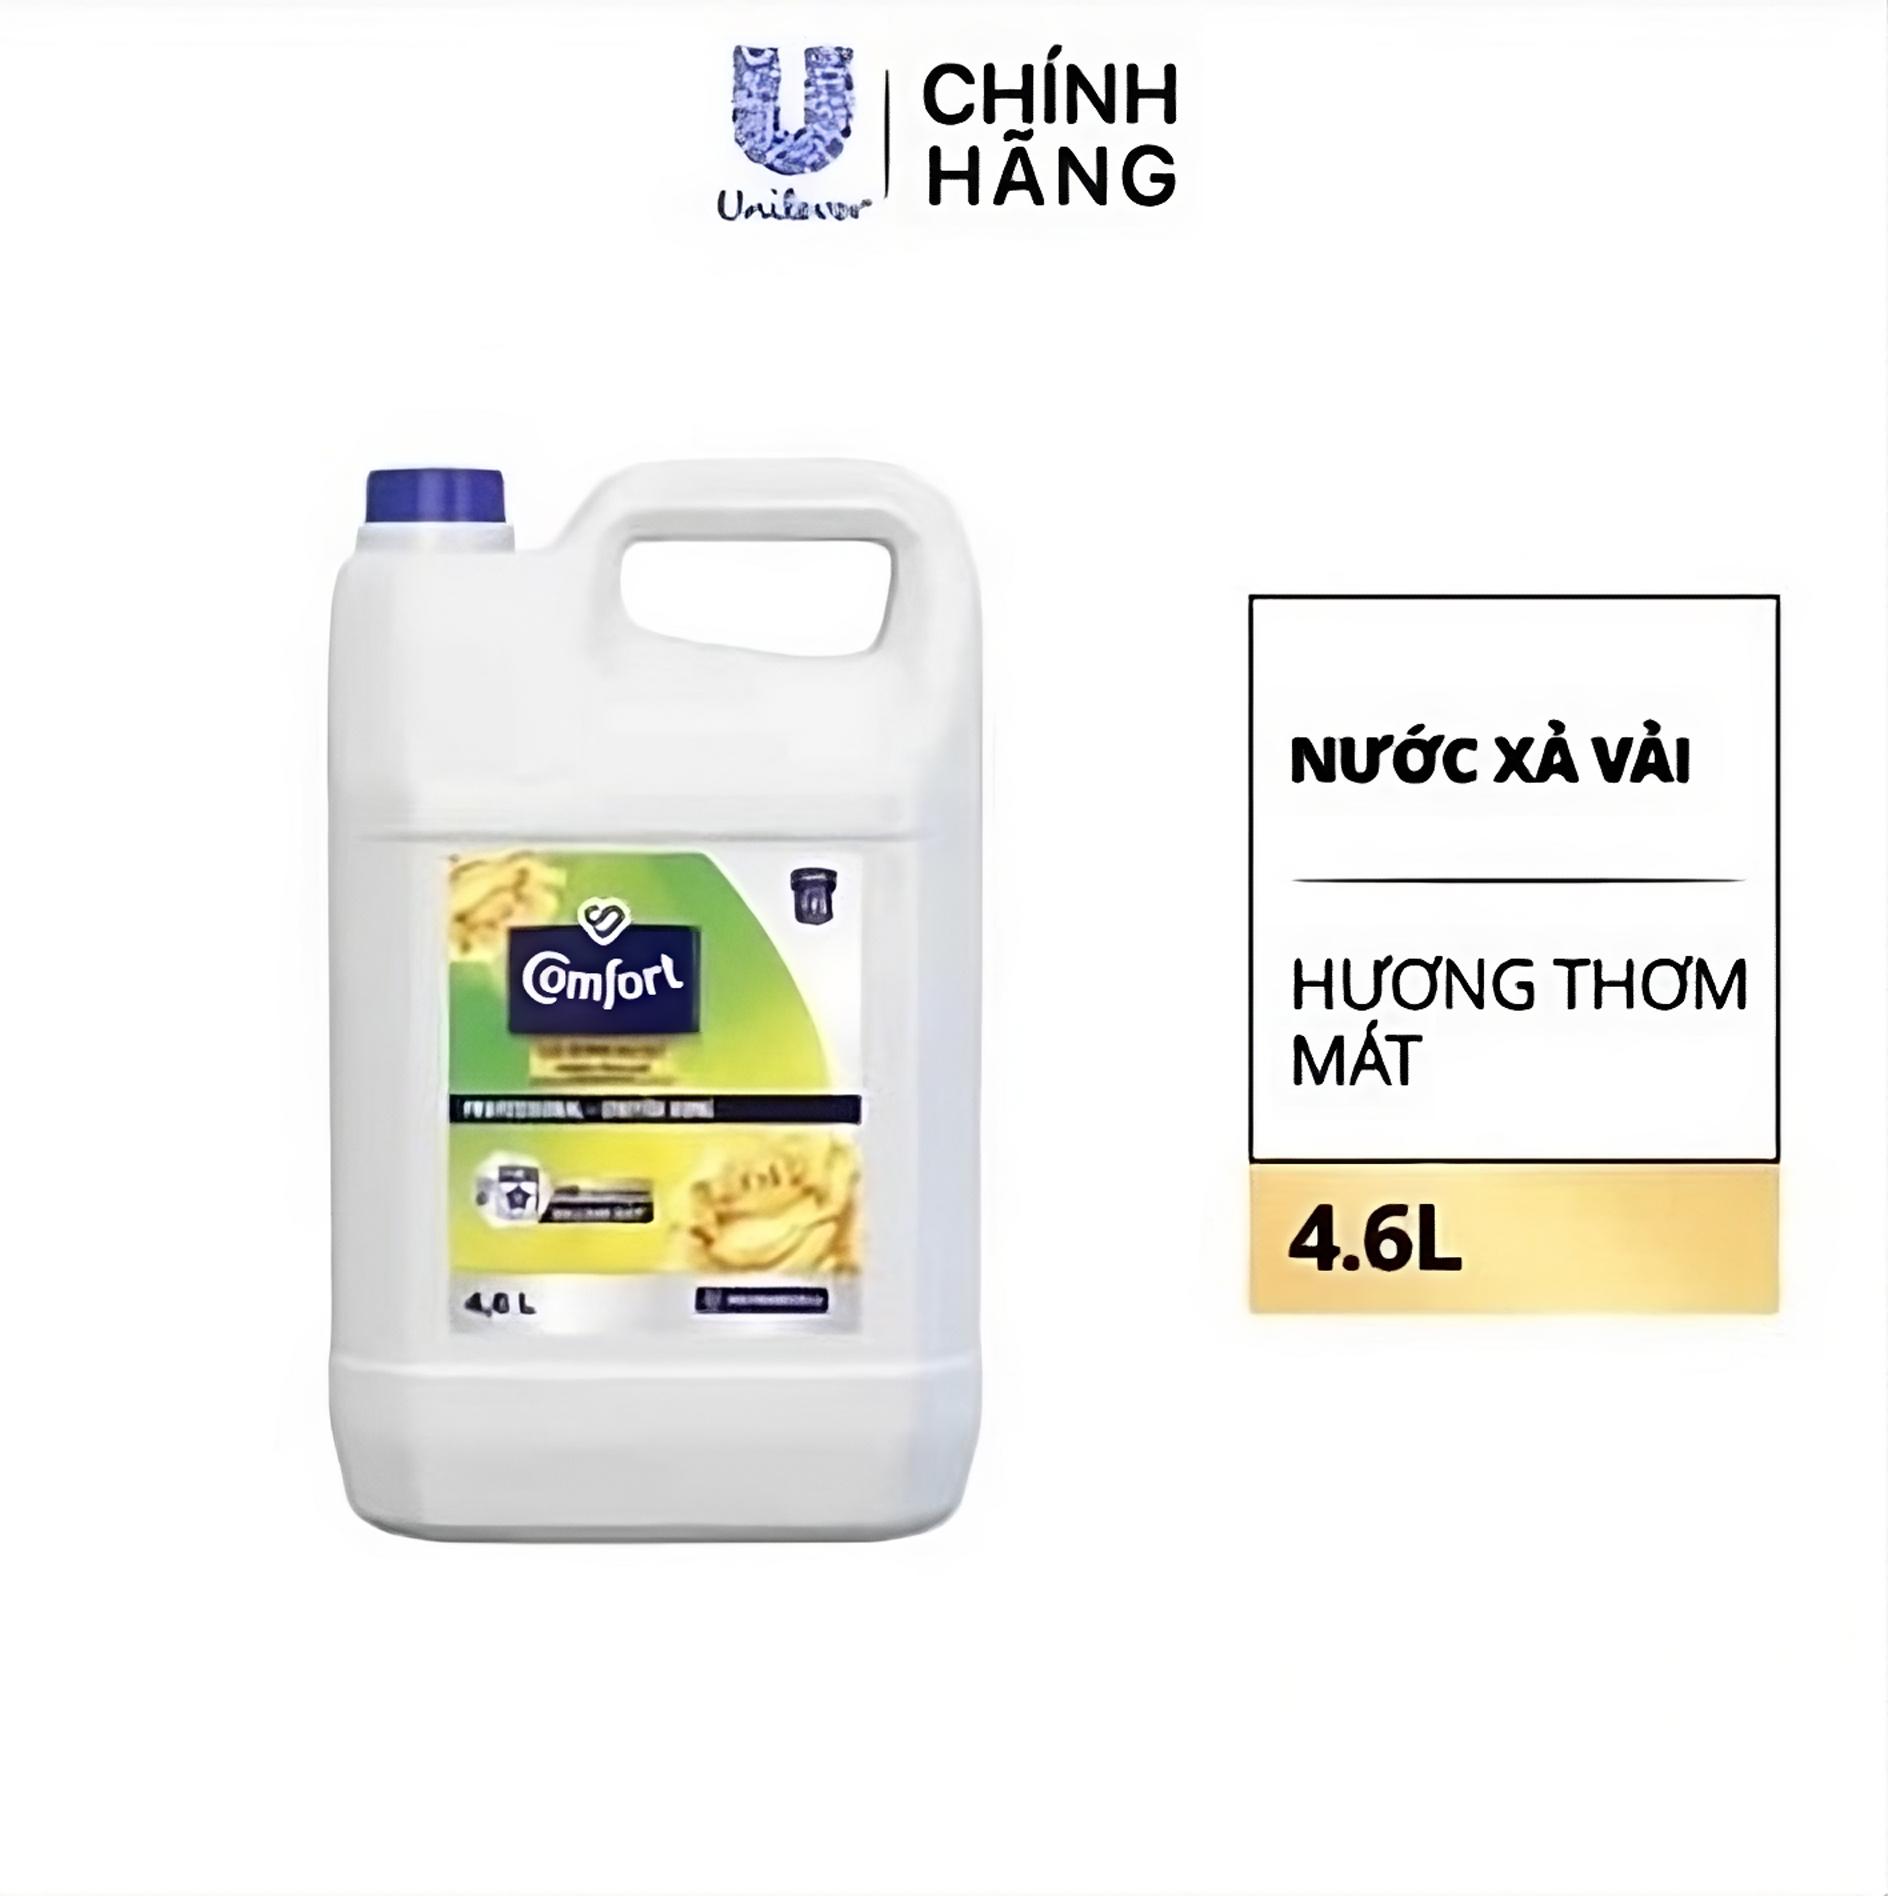 https://thaothanh.com.vn/stogare/images/products/69993490-1.jpeg